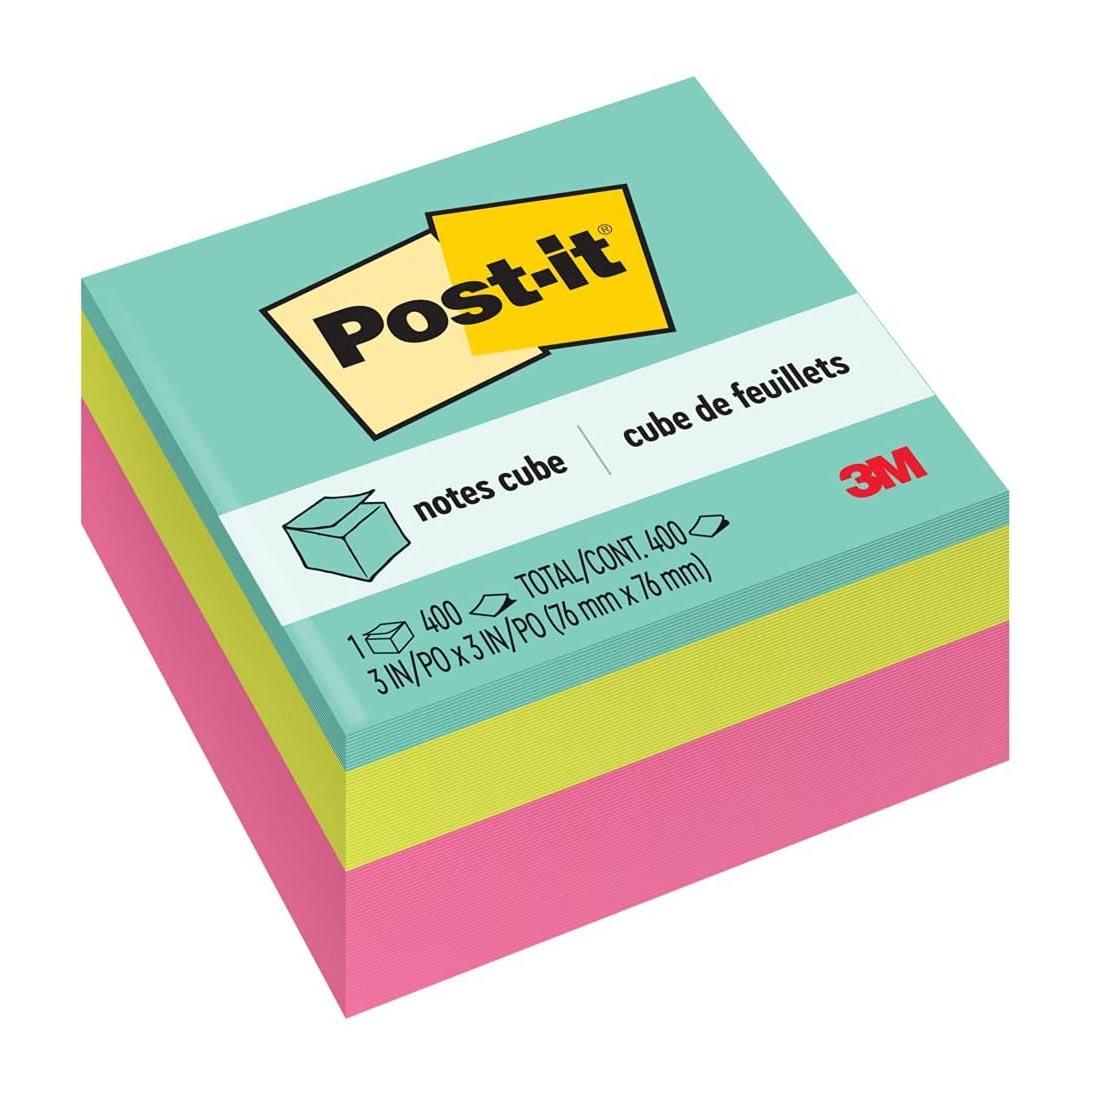 Post-it Notes: 3x3", 400-Sheet Cube, assorted colors